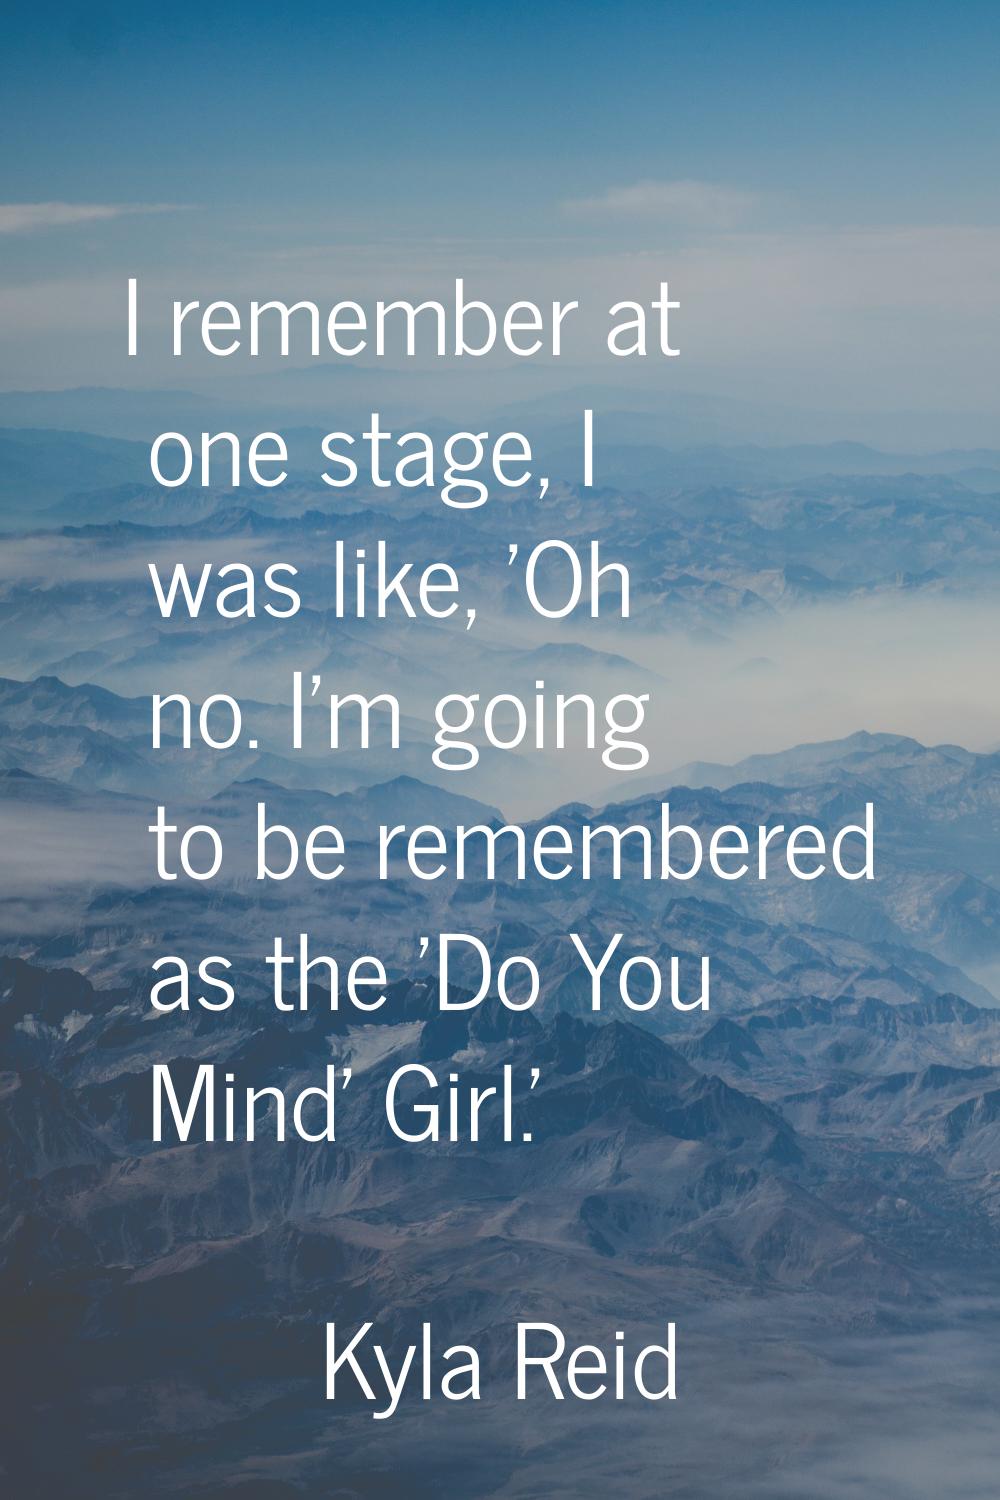 I remember at one stage, I was like, 'Oh no. I'm going to be remembered as the 'Do You Mind' Girl.'